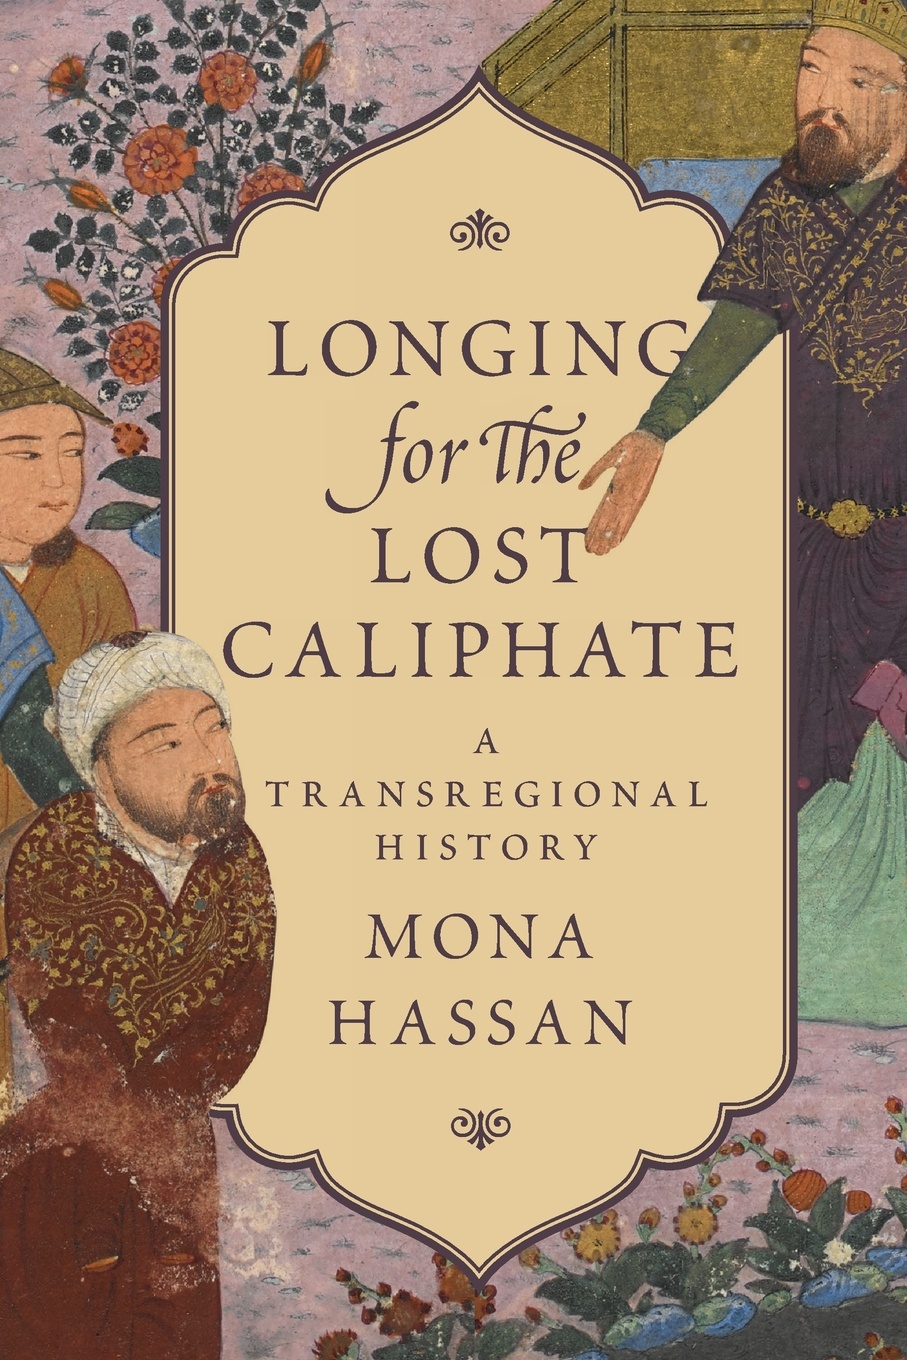 Longing for the Lost Caliphate. A Transregional History